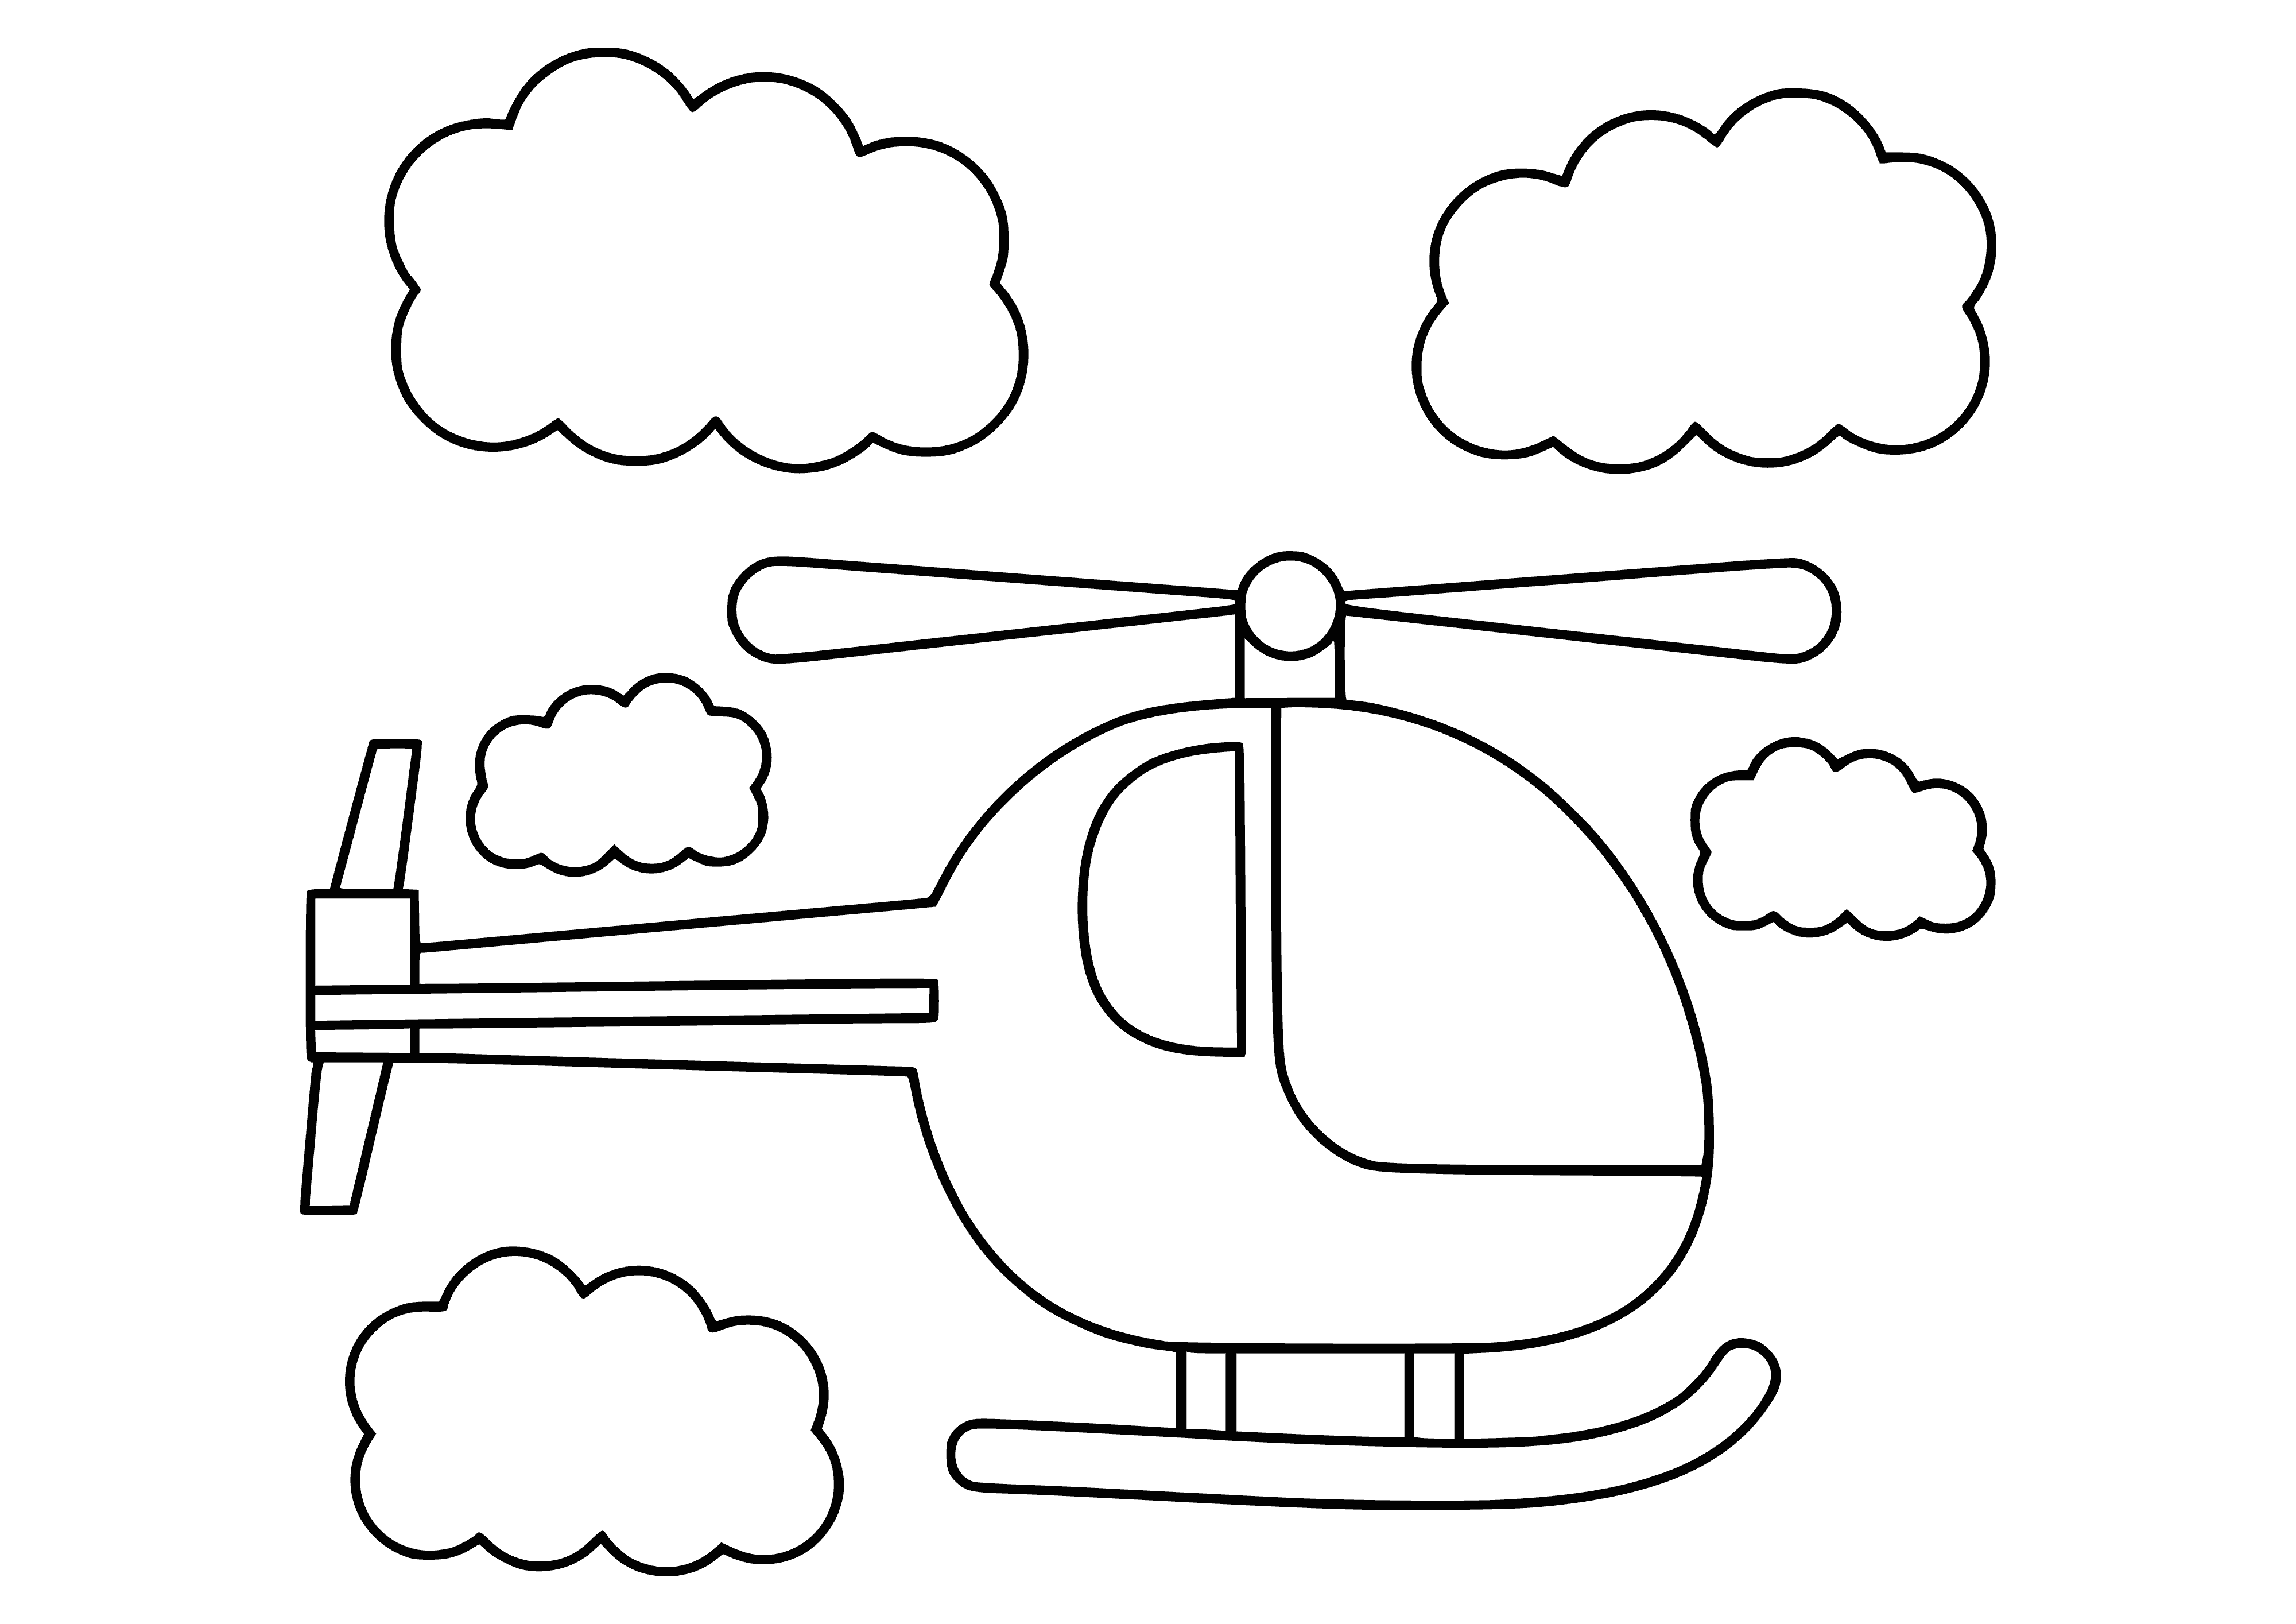 coloring page: Helicopter flying over city: yellow body & red stripe, 2 rotors on top. #aviation